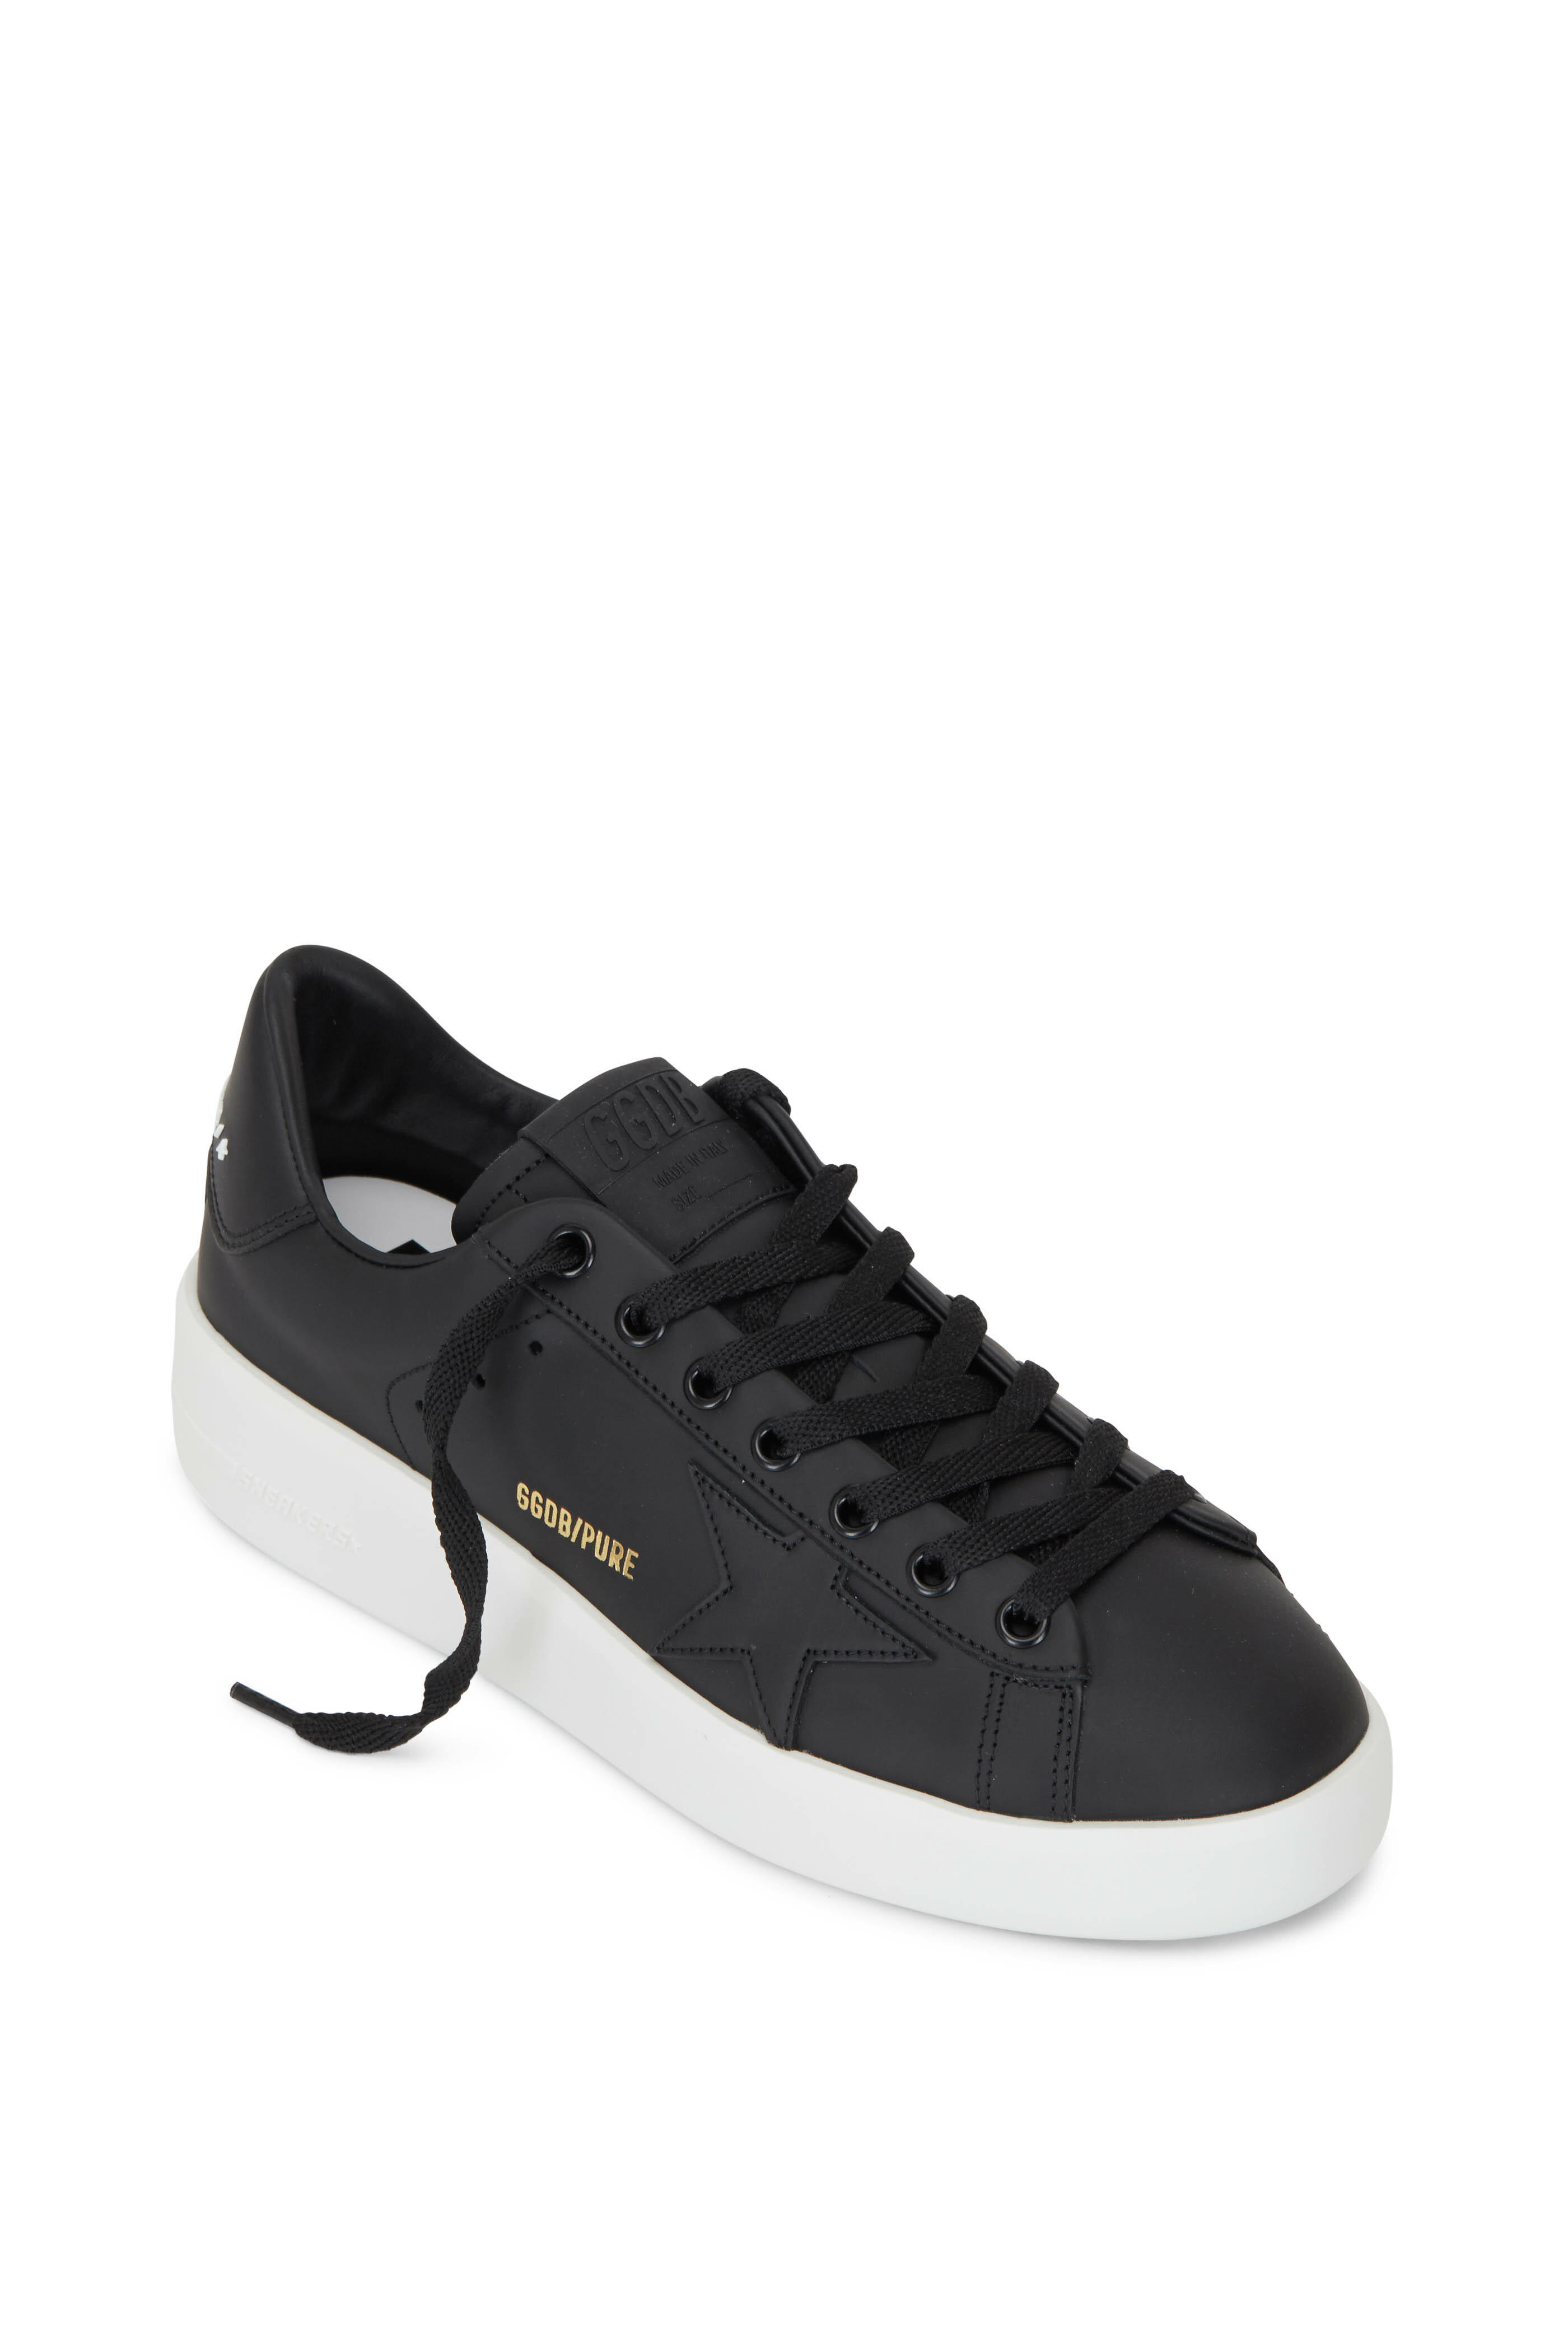 Golden Goose - Pure Star Black Leather Sneaker | Mitchell Stores